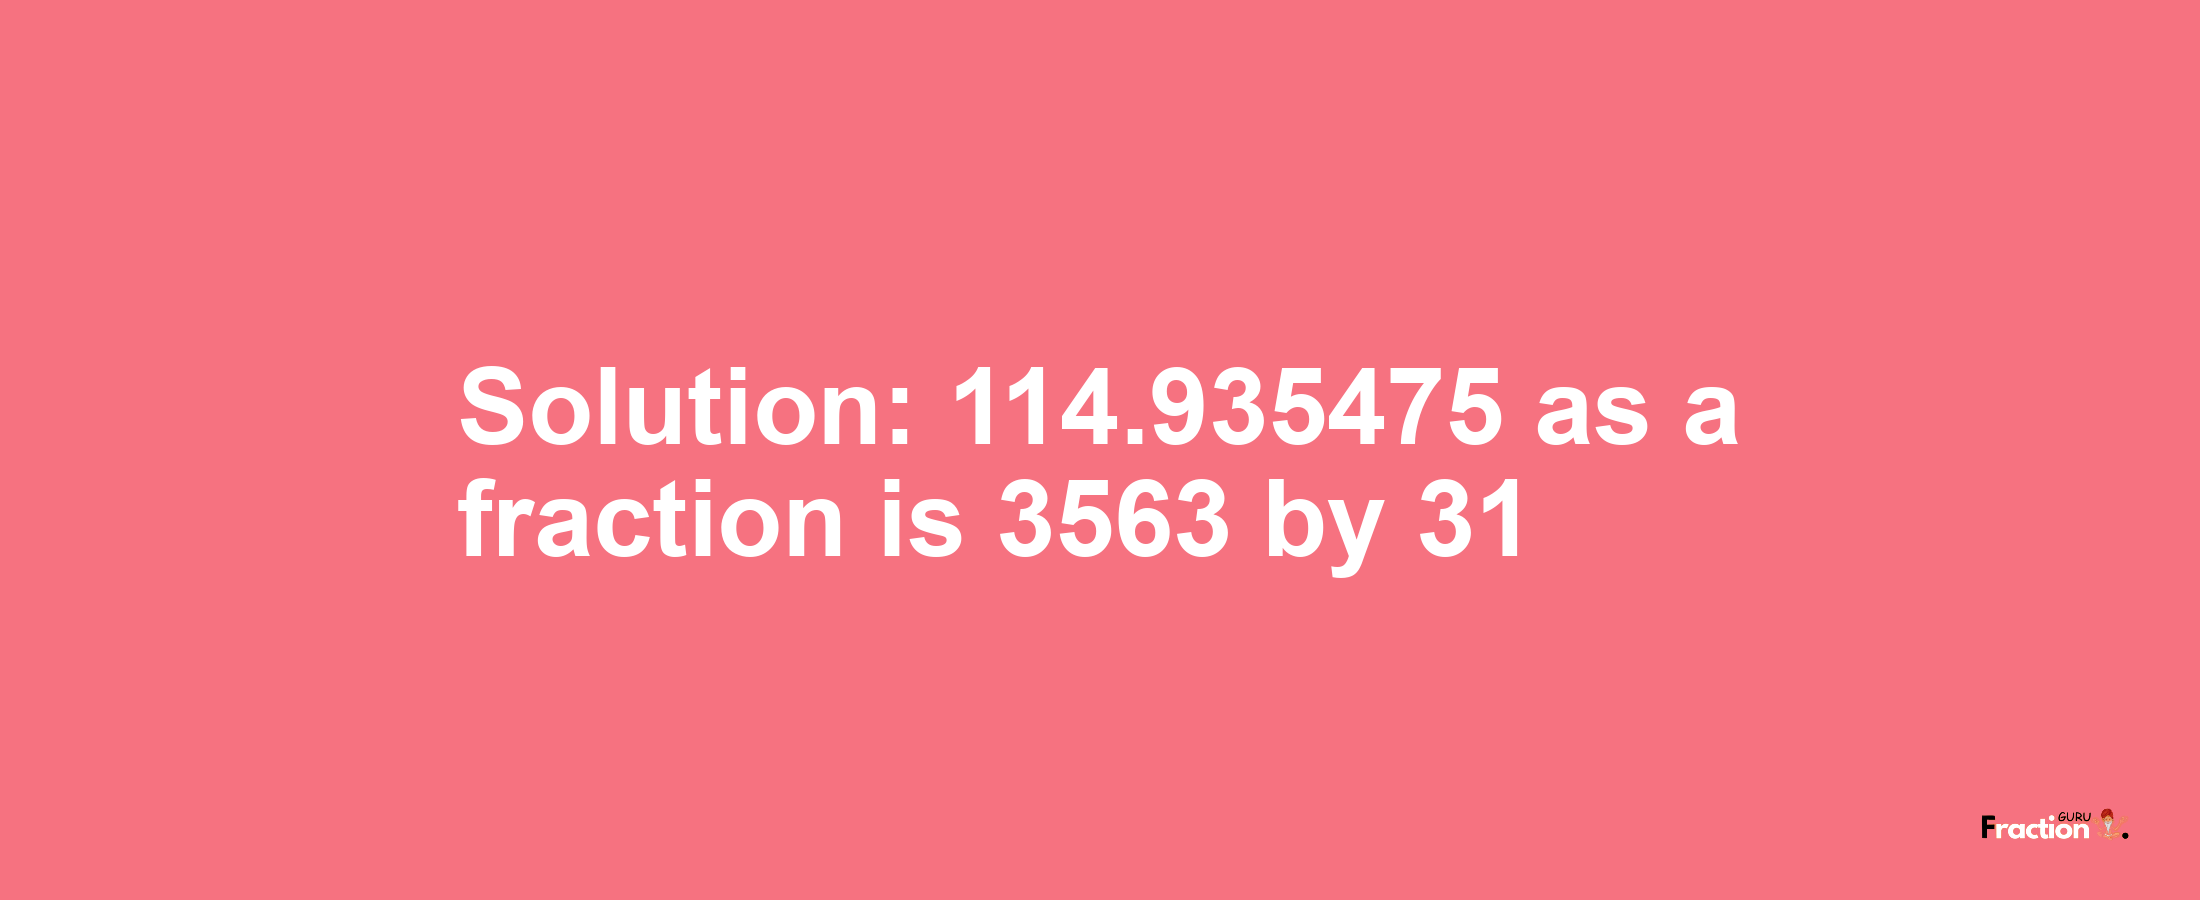 Solution:114.935475 as a fraction is 3563/31